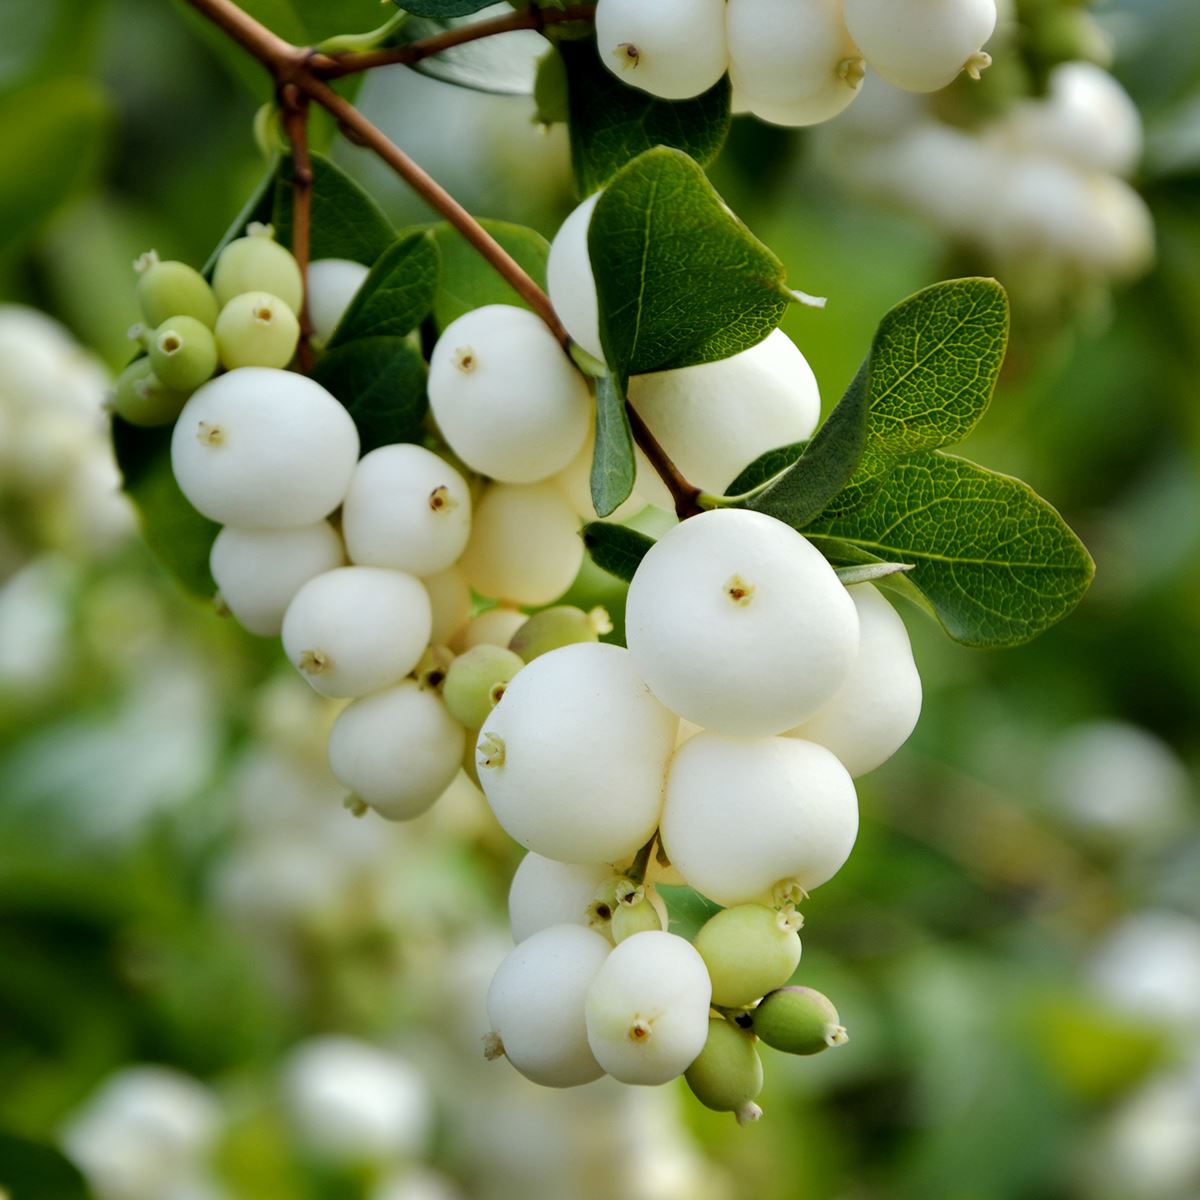 Edible White Berries From Native Plants